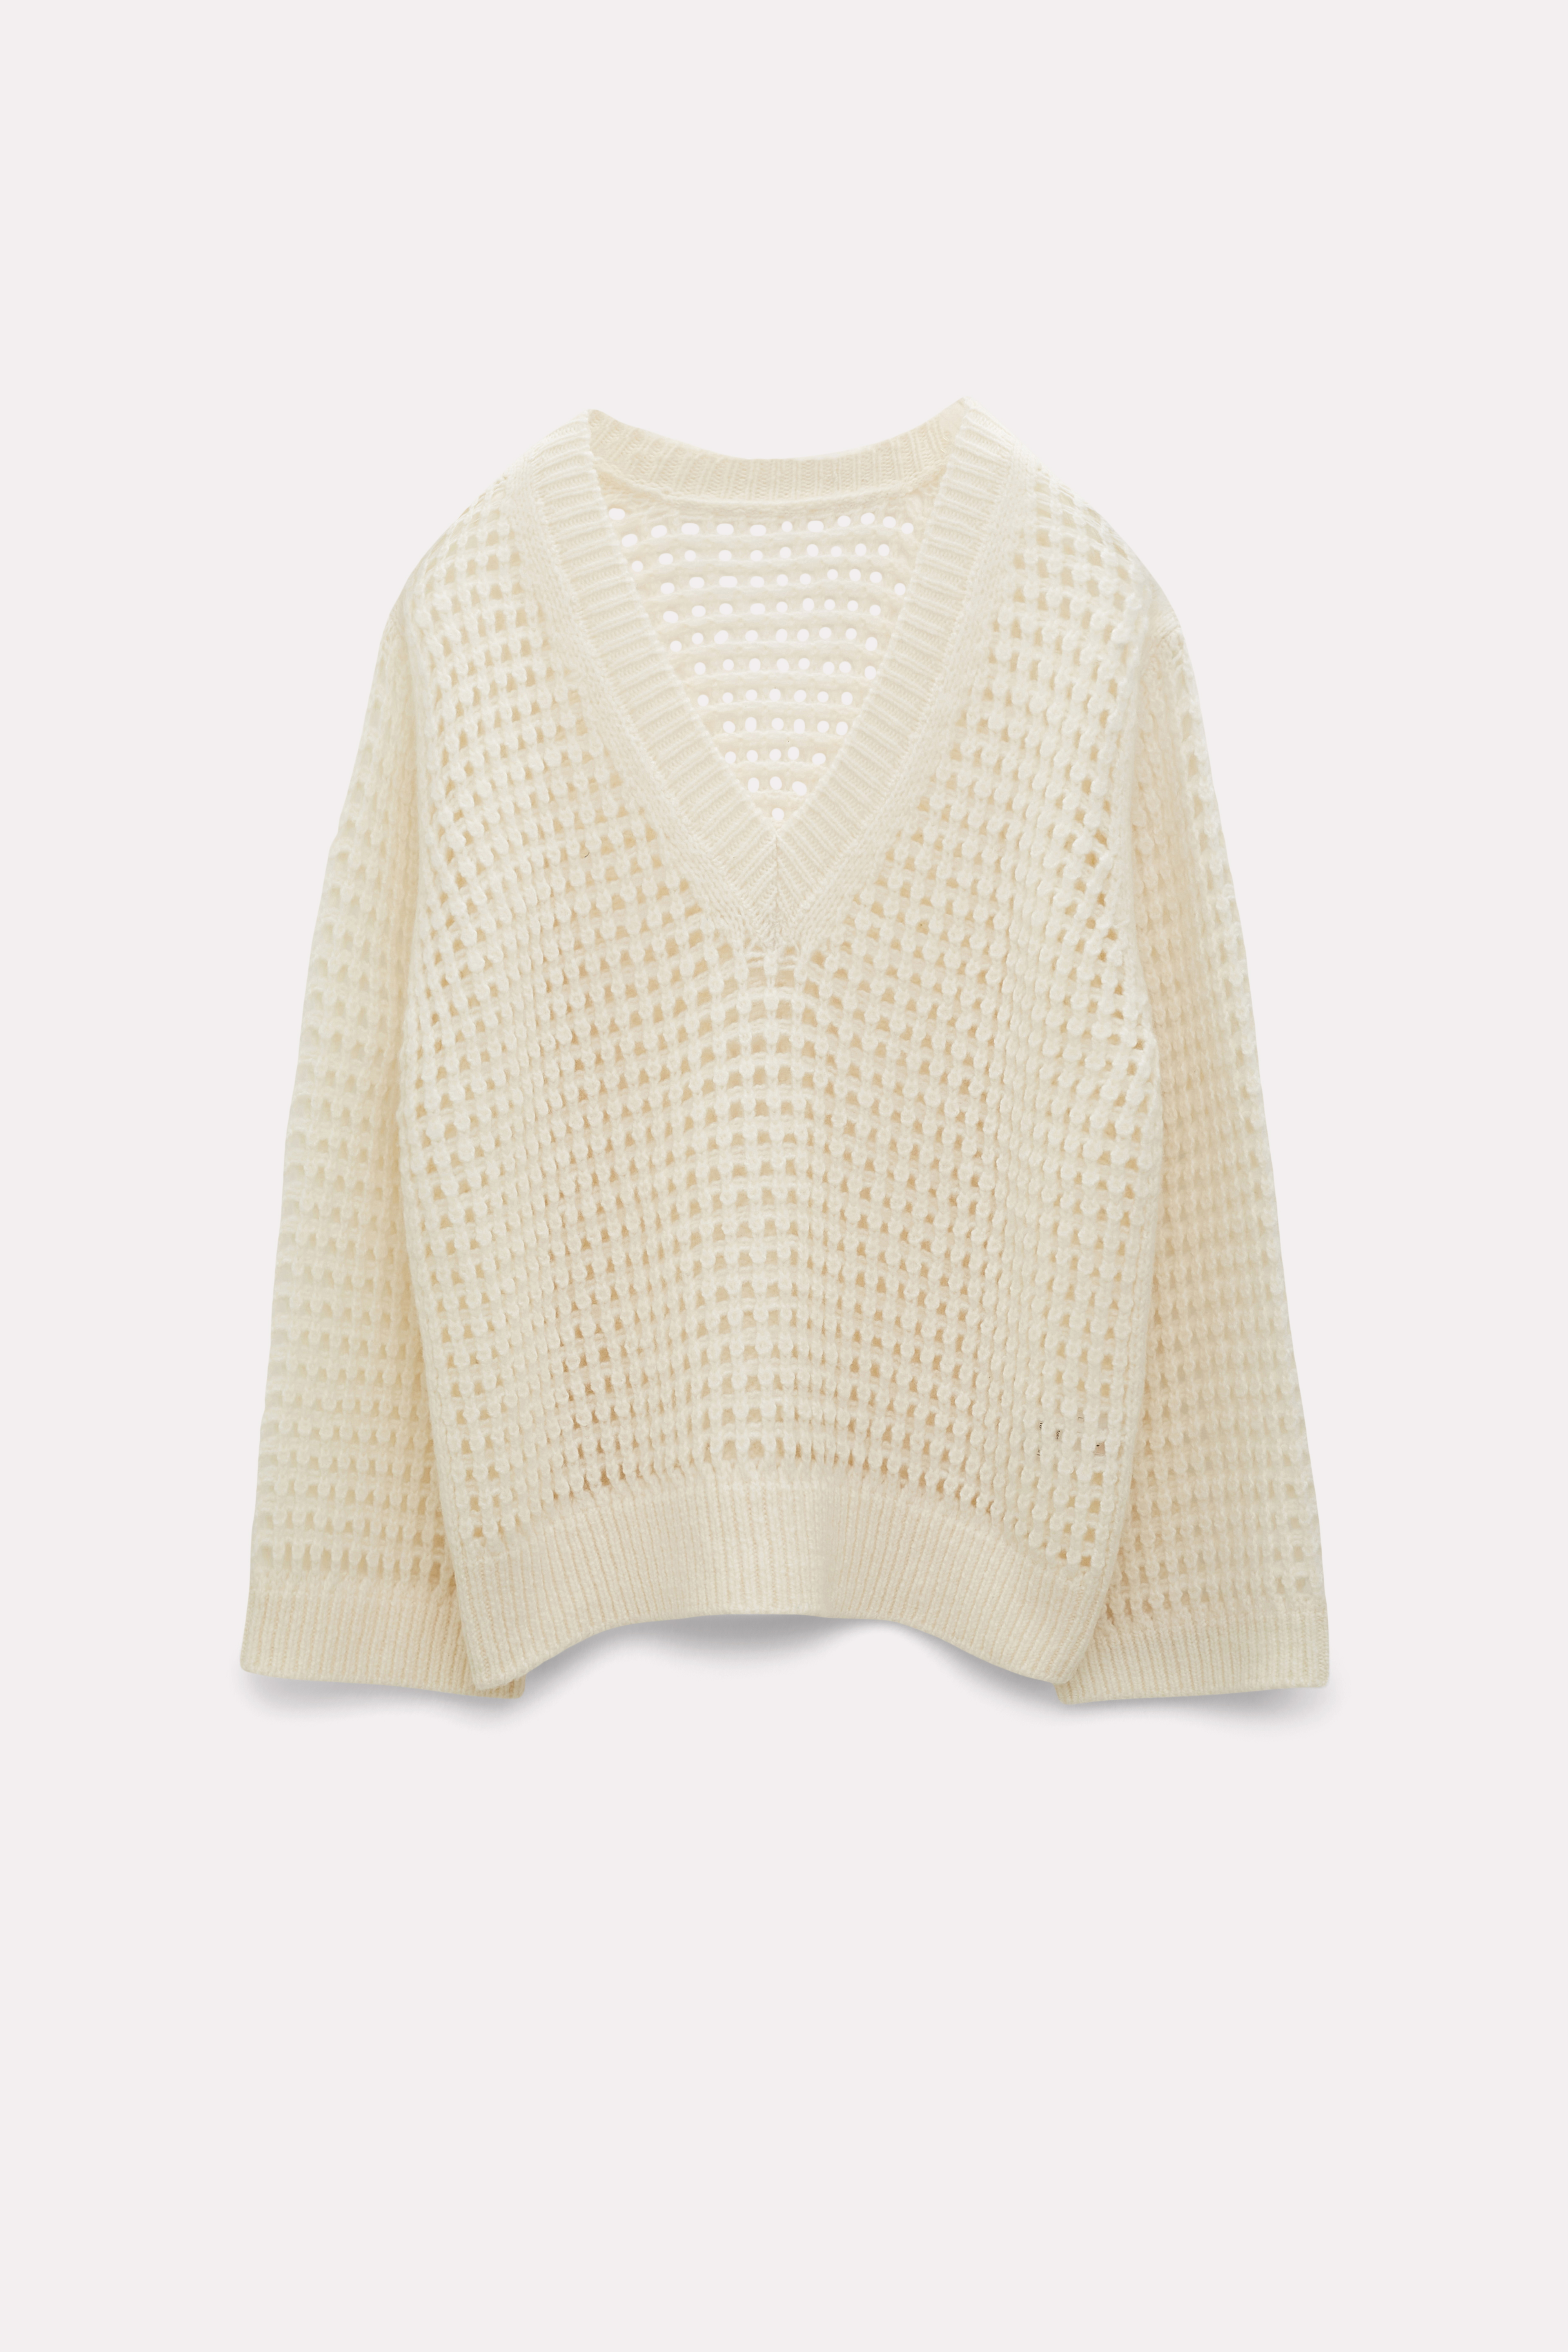 Dorothee Schumacher Open Knit V-neck Sweater In Wool-cashmere In White